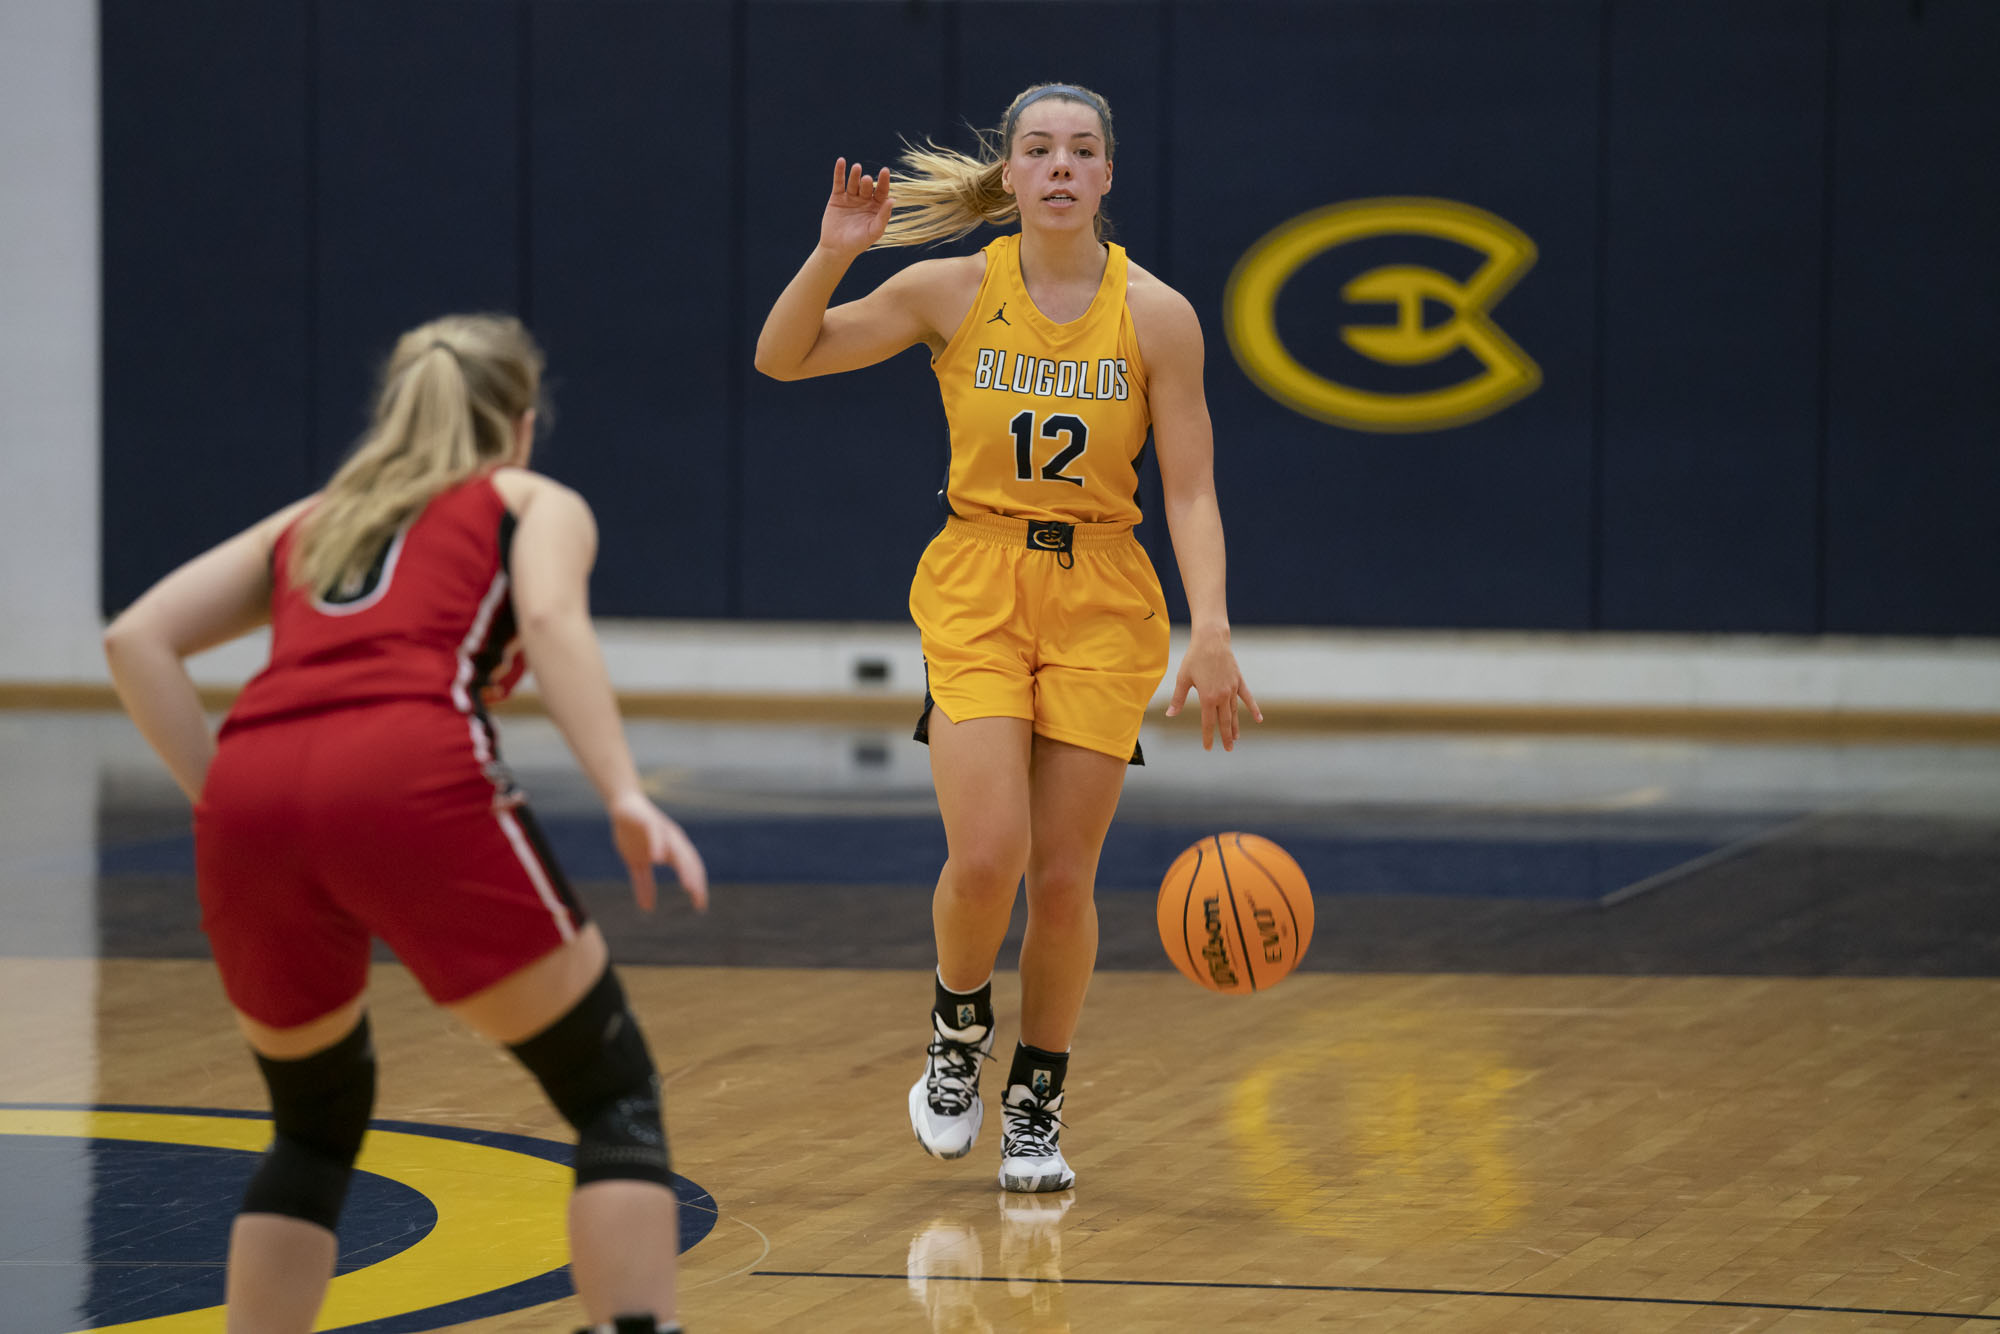 Blugolds Upset No. 6 Storm with Last Second Layup